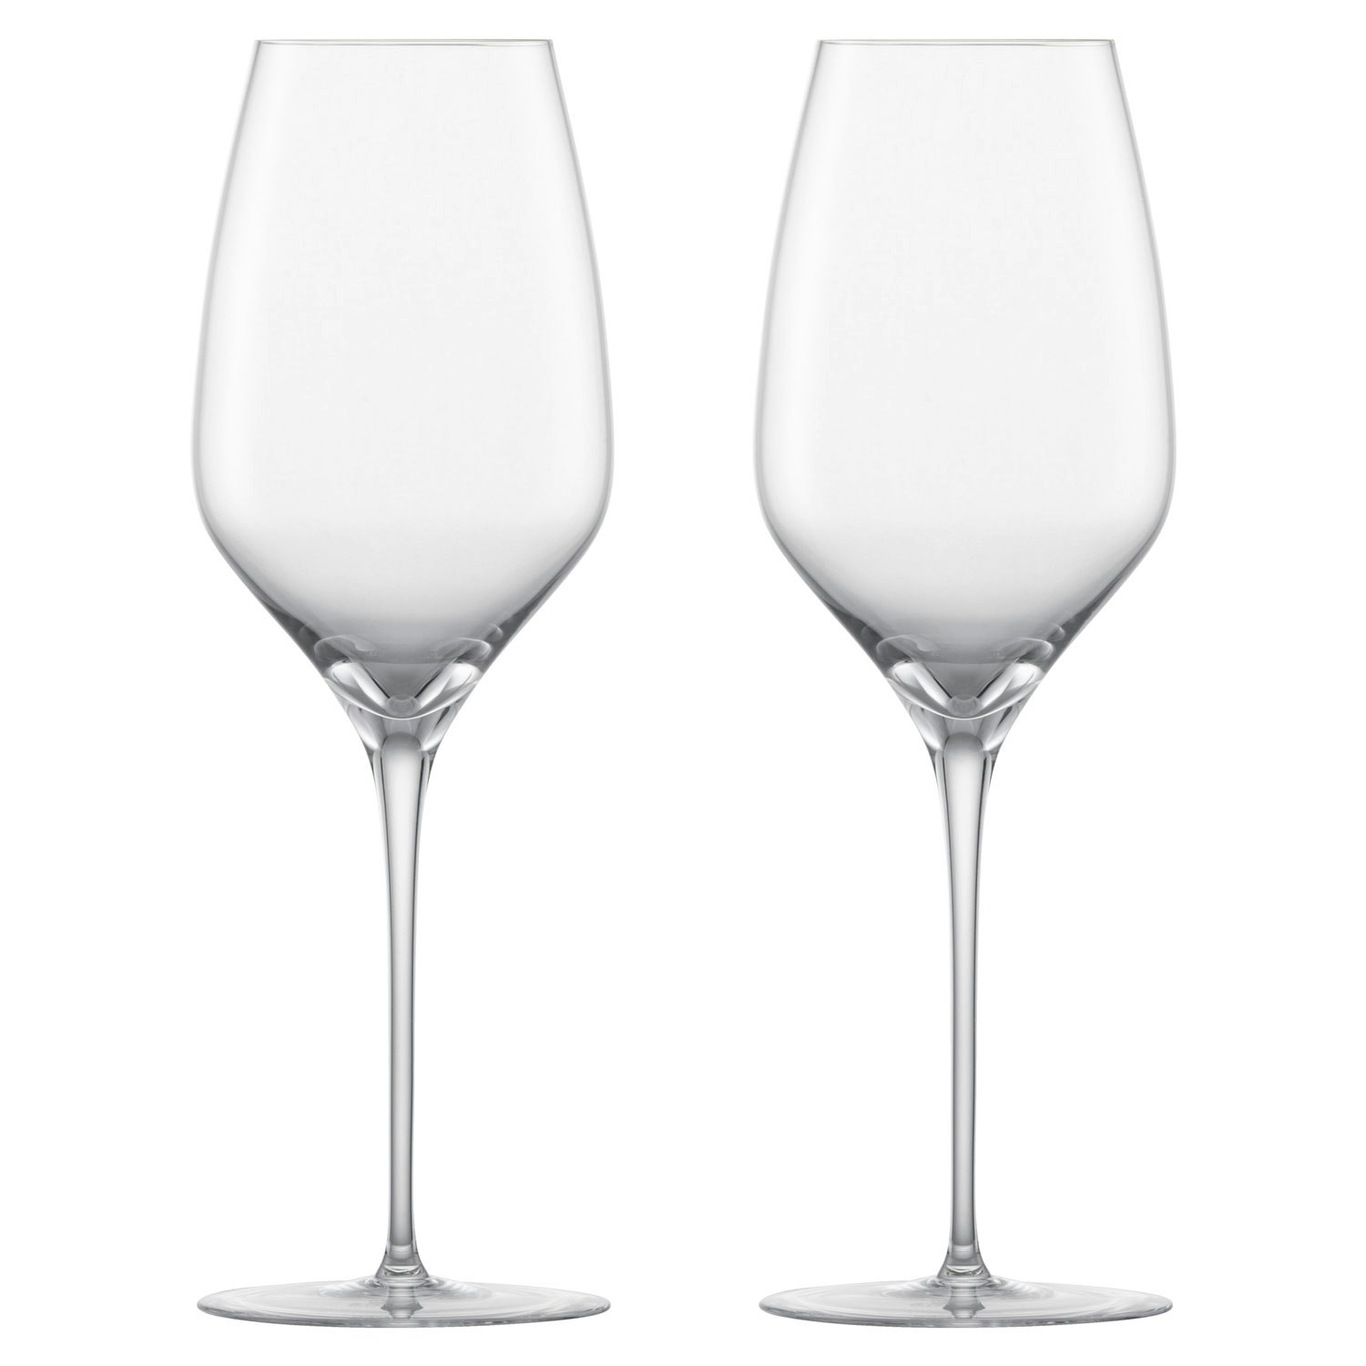 Alloro Riesling White Wine Glass 52, 2-pack